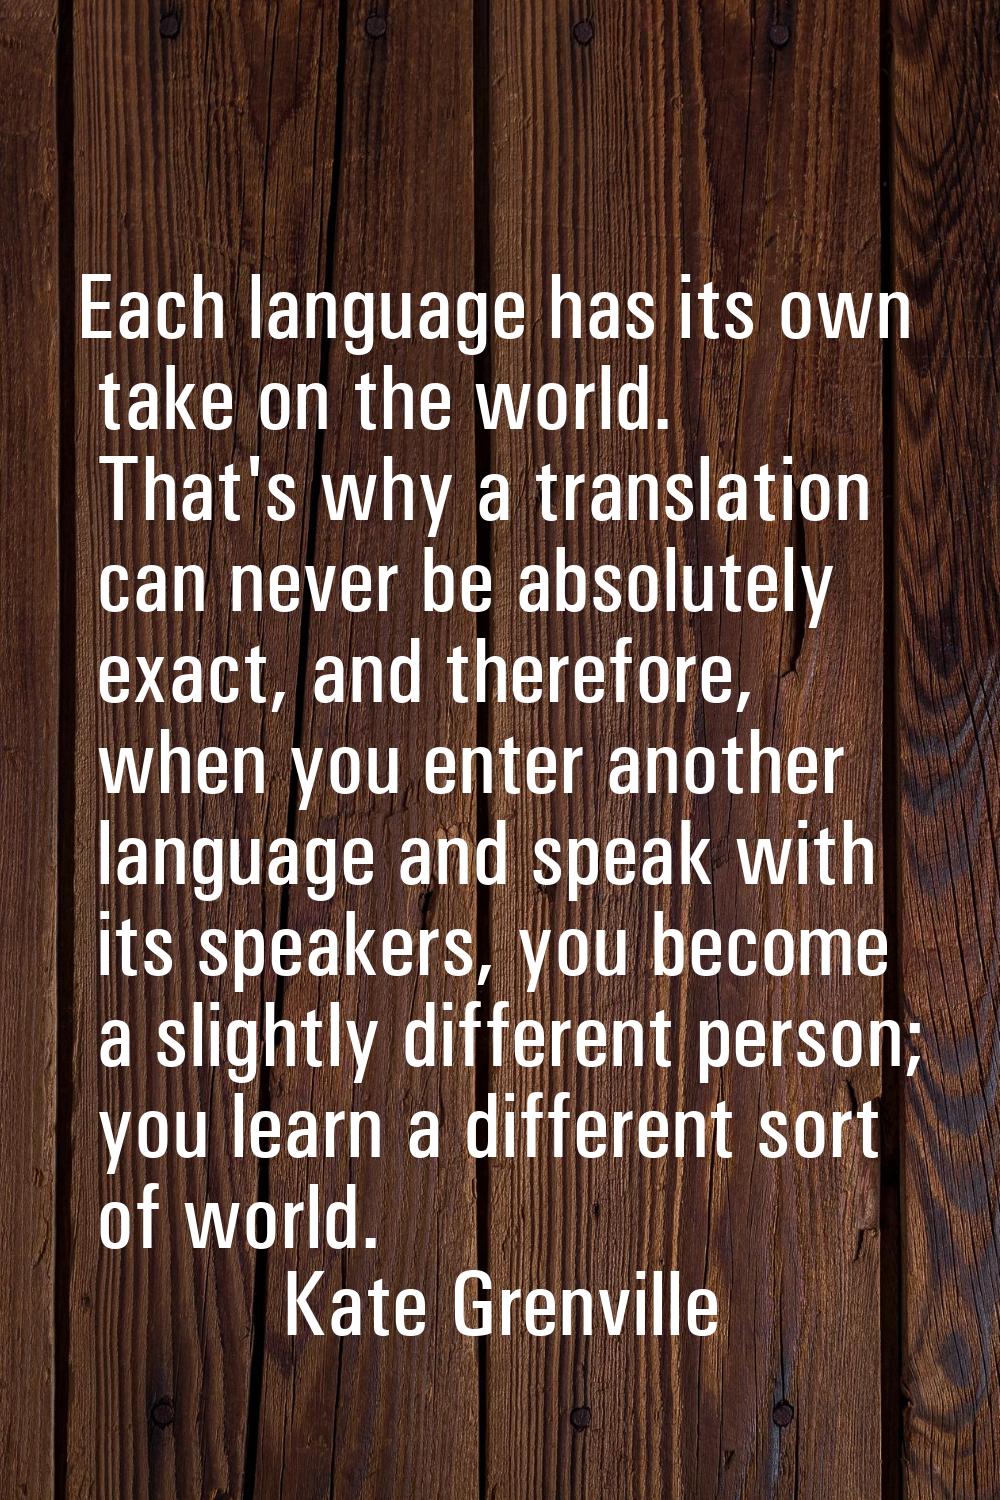 Each language has its own take on the world. That's why a translation can never be absolutely exact